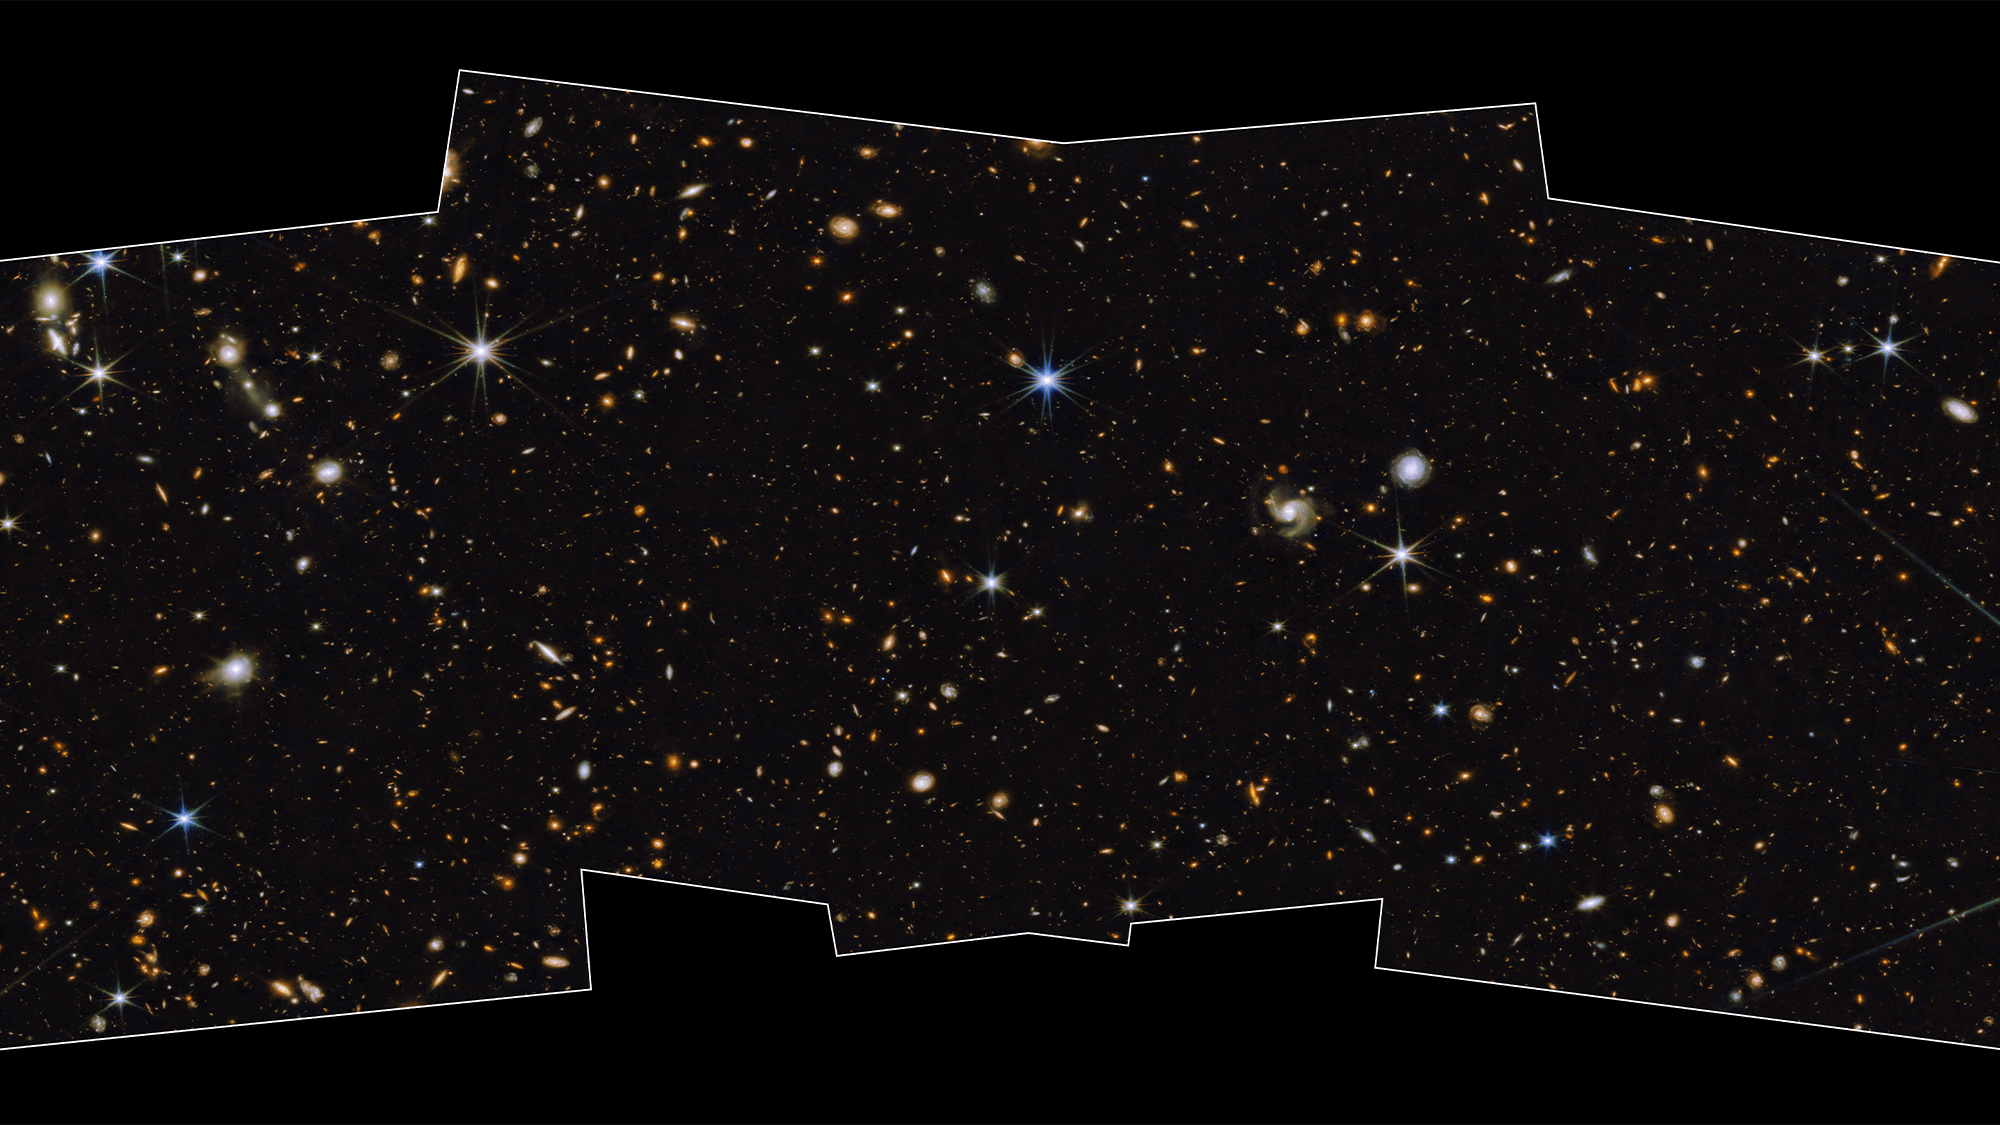 JWST’s new image unveils a field of glittery galaxies